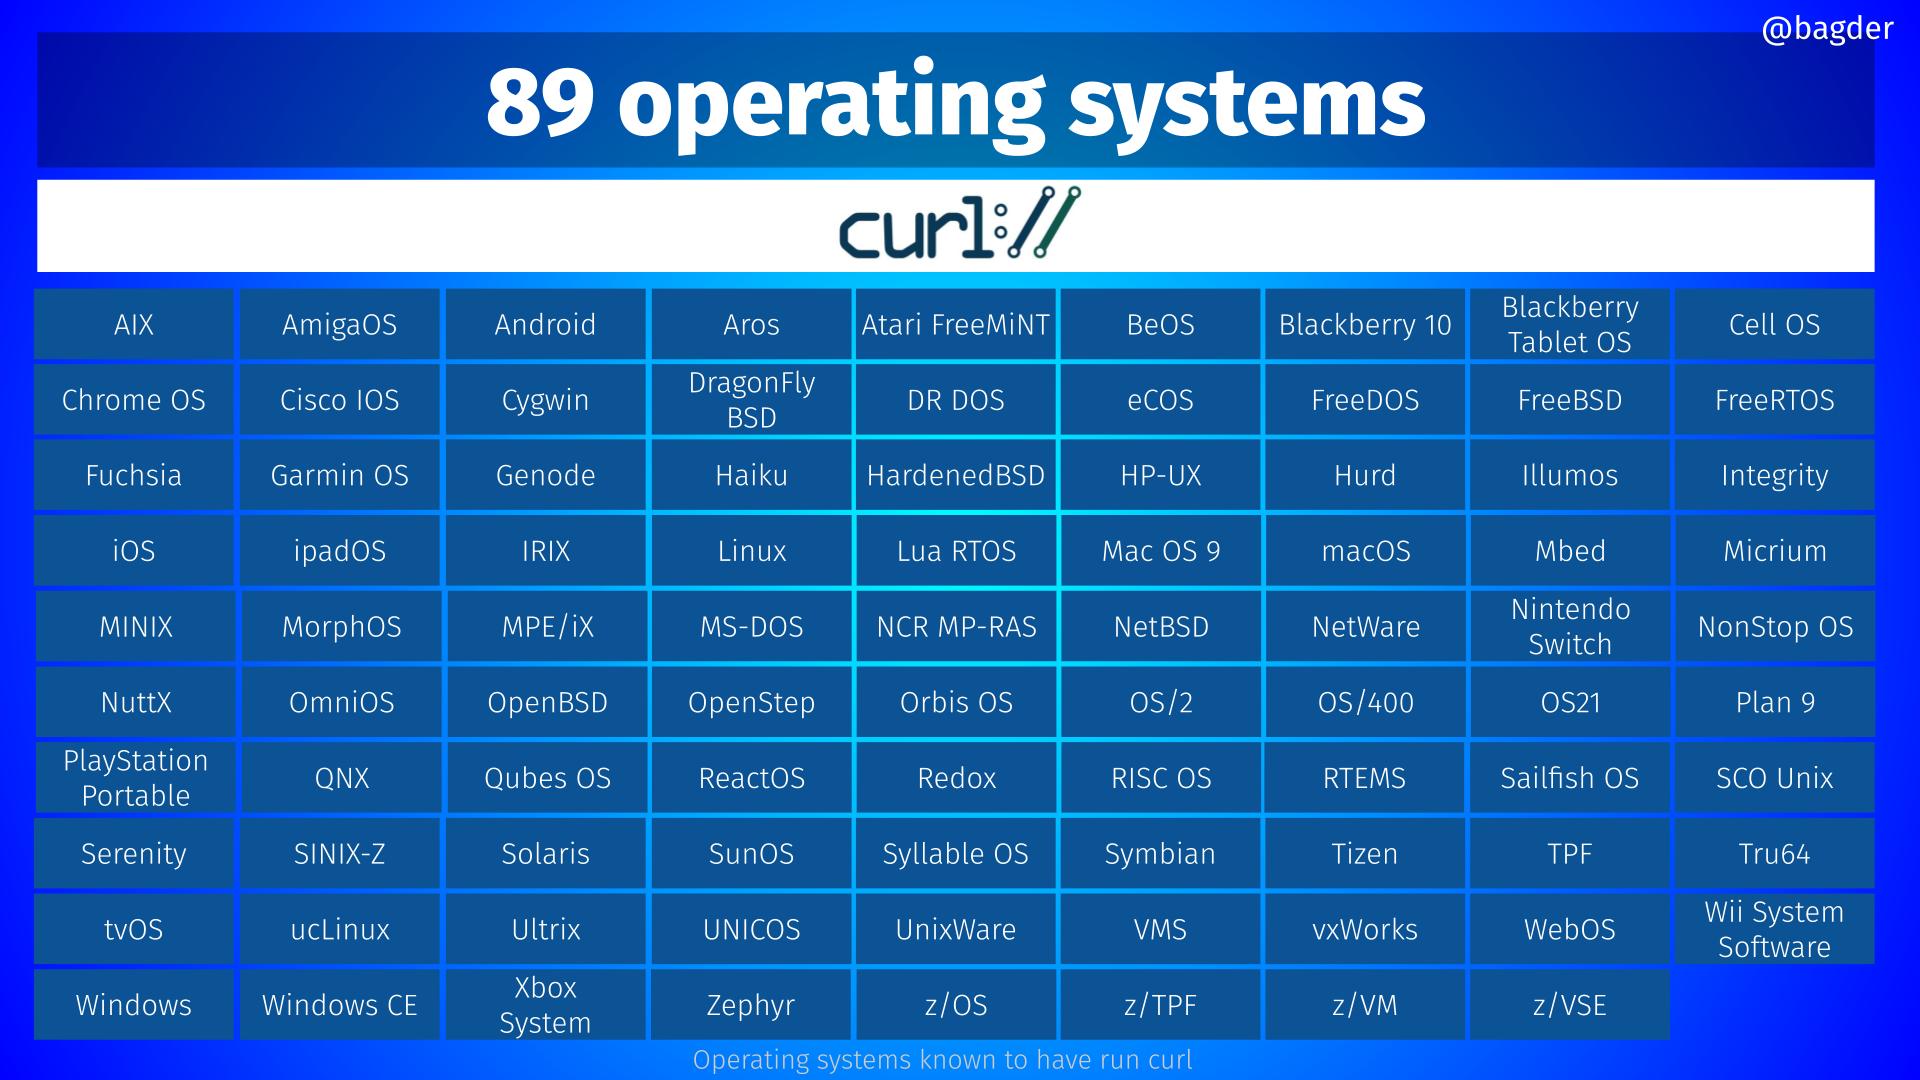 89 operating systems